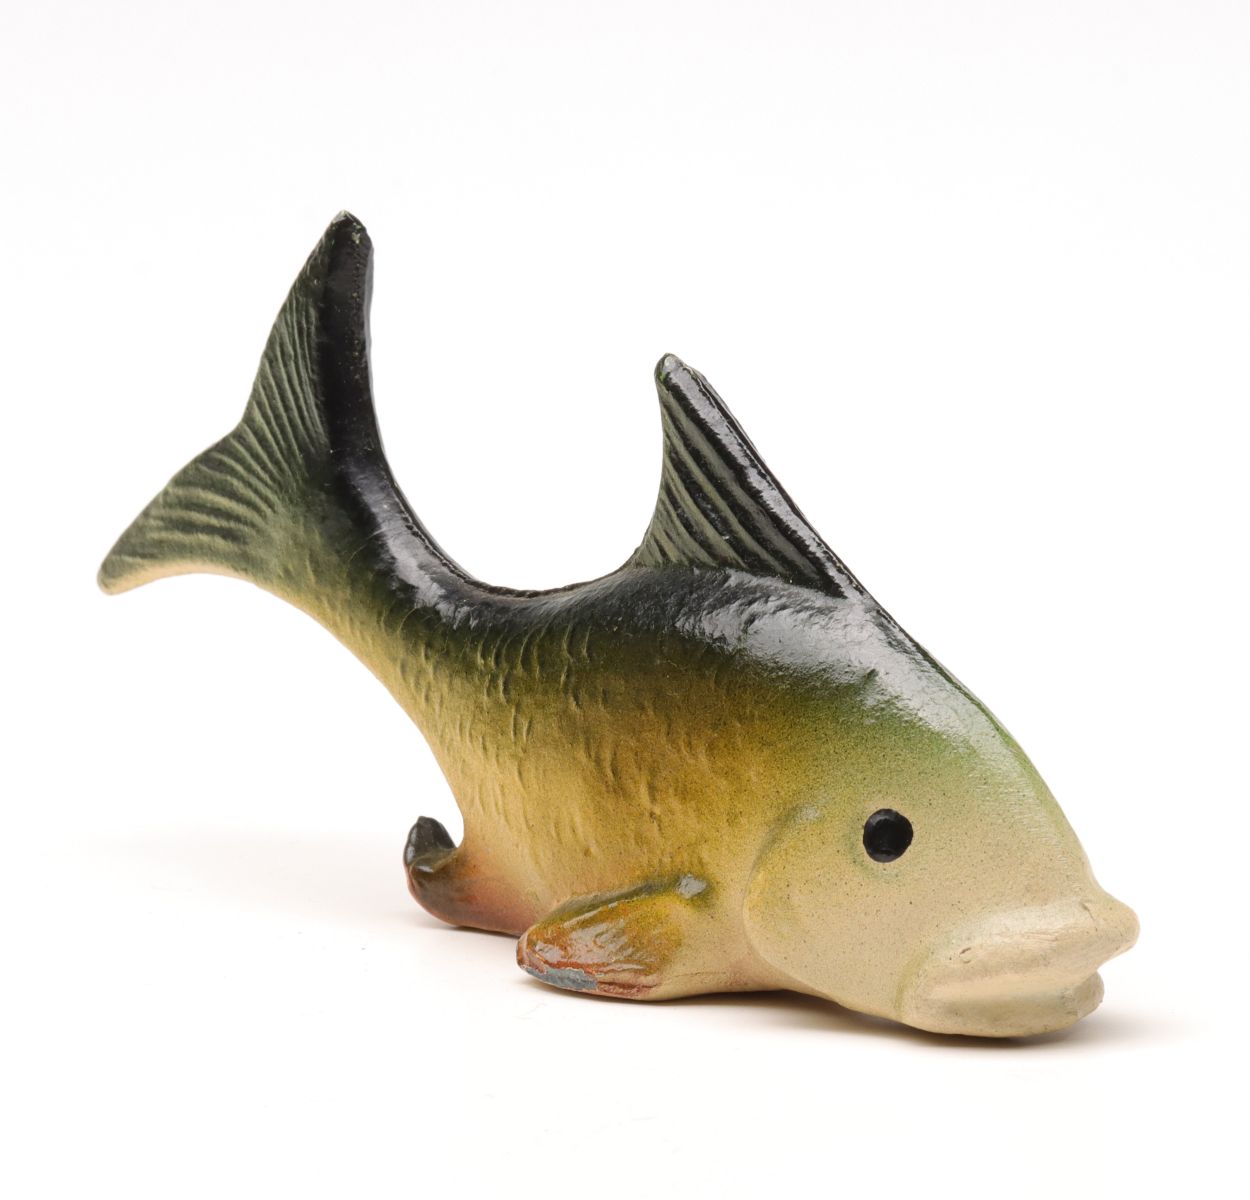 A VERY NICE FISH FIGURAL CAST IRON BOTTLE OPENER